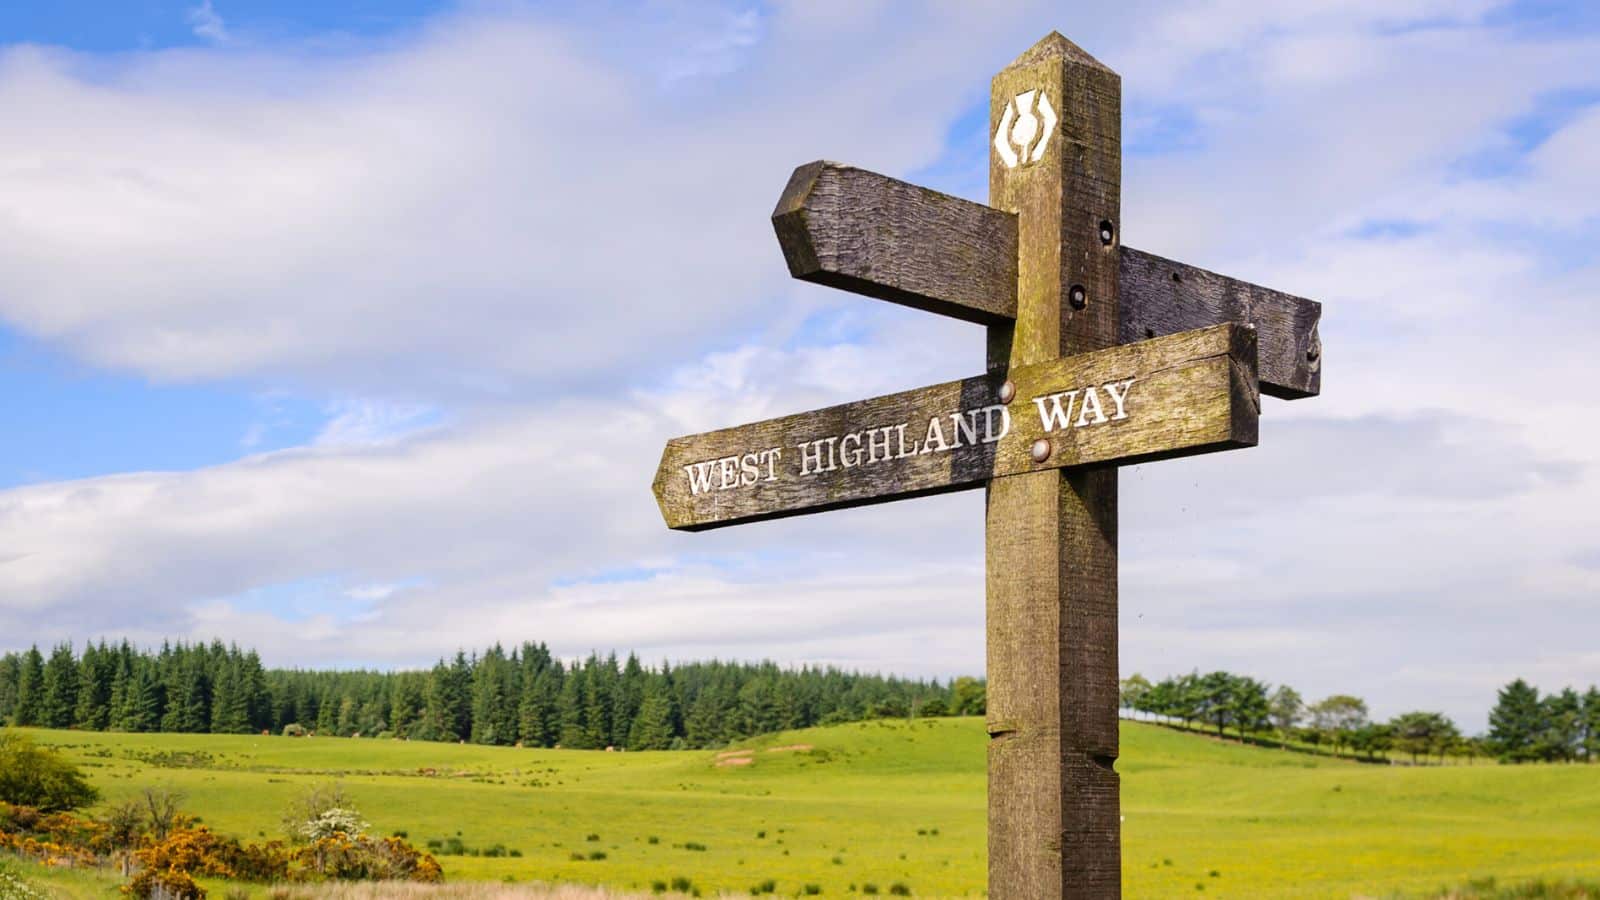 <p>The West Highland Way is one of Scotland’s most popular multi-day hikes. The trail extends 154km (96 miles) from Milngavie to Fort William, taking you through stunning and diverse landscapes.</p><p>Expect mountains, rivers, and lochs, incredible valleys, and densely forested areas. There are pubs to rest your legs at, too, campsites to meet fellow hikers at, distilleries to explore (for research purposes only, of course), and a whole lot of other unique sights to enjoy.</p>